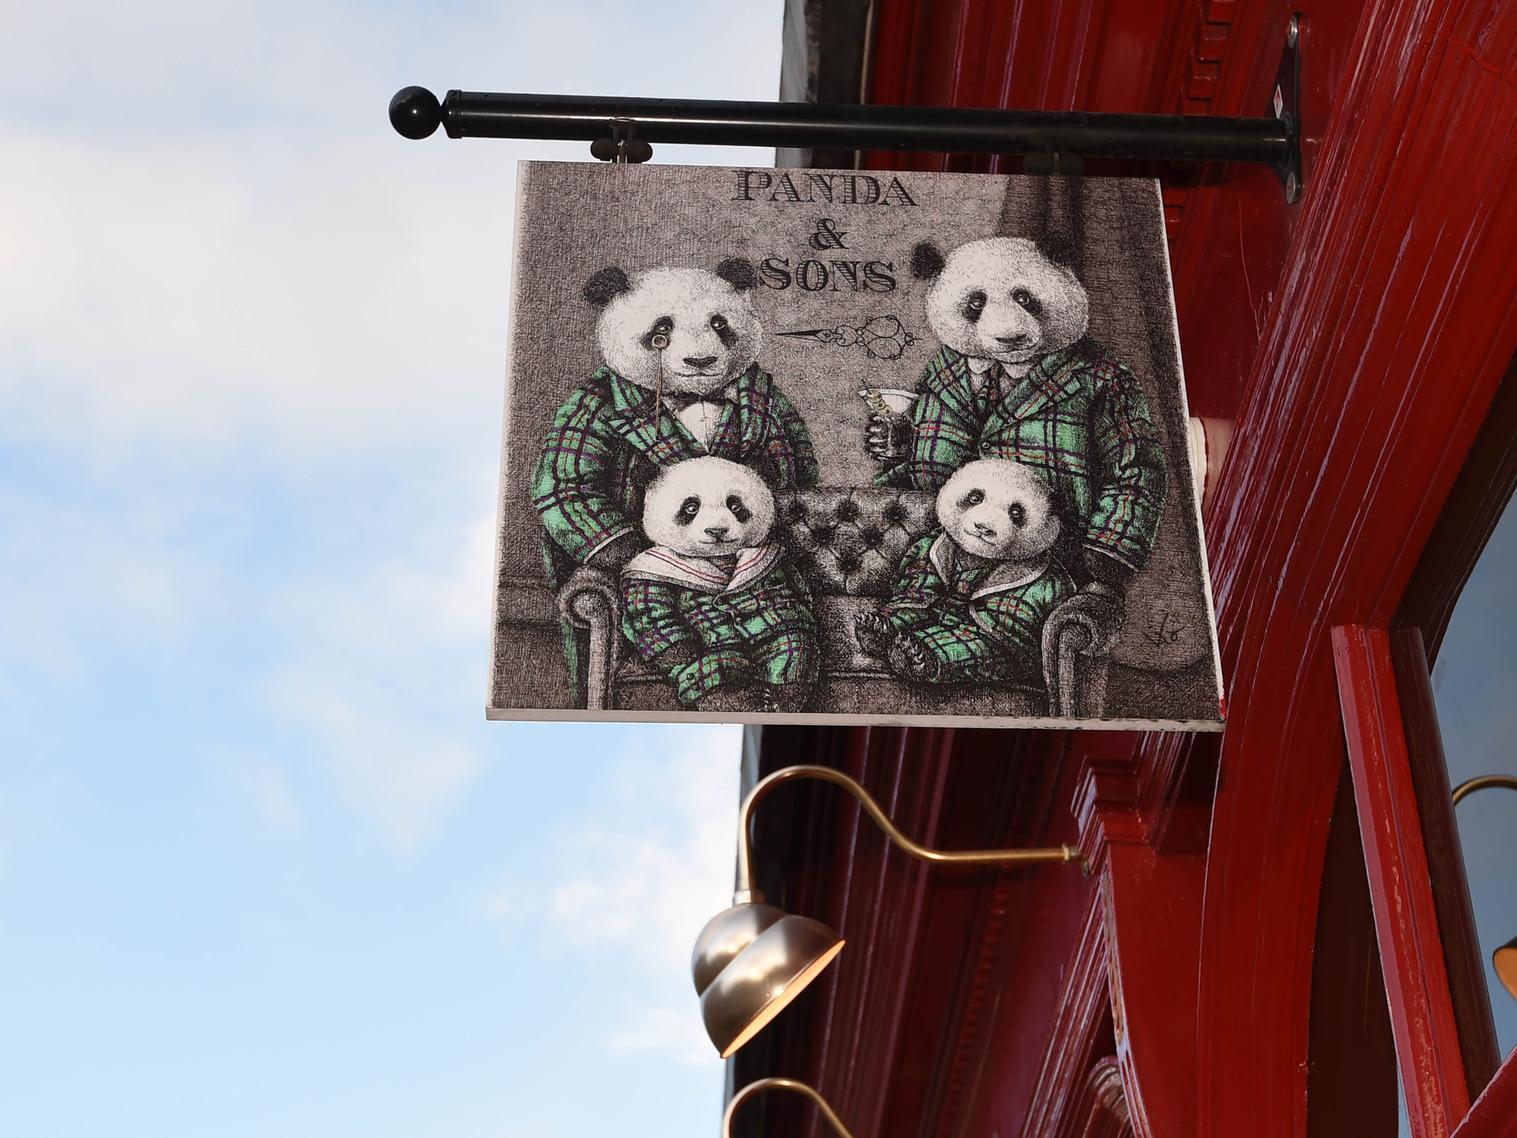 A quirky sign outside the bar shows a group of pandas dressed up in suits.